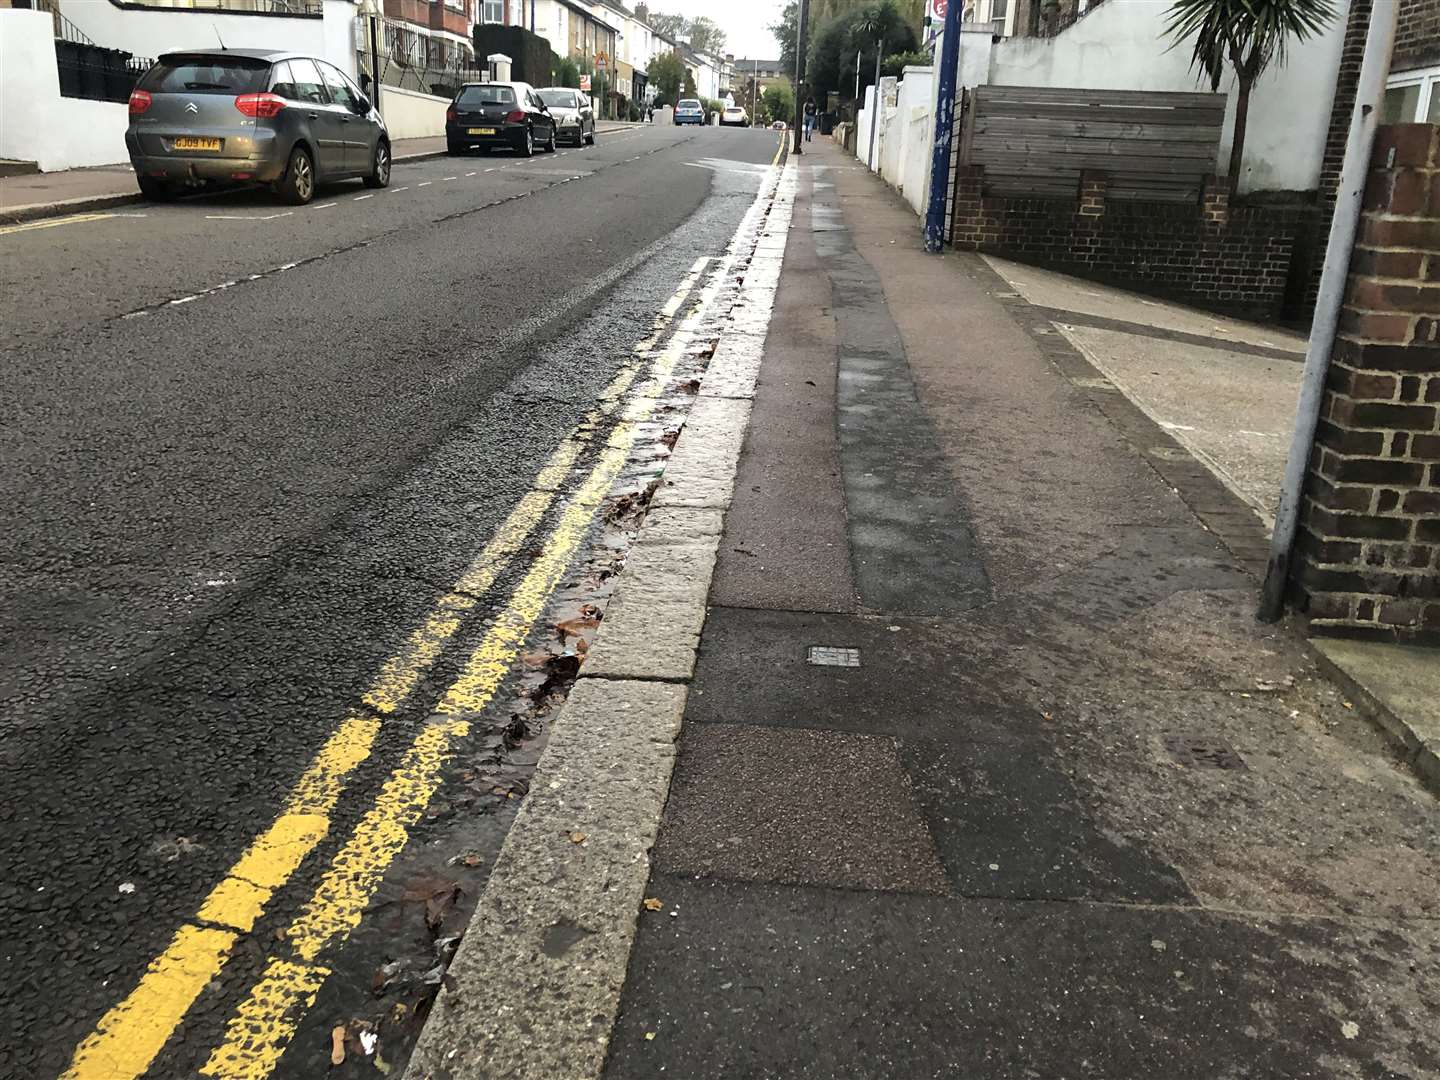 The water is running down the side of the kerb